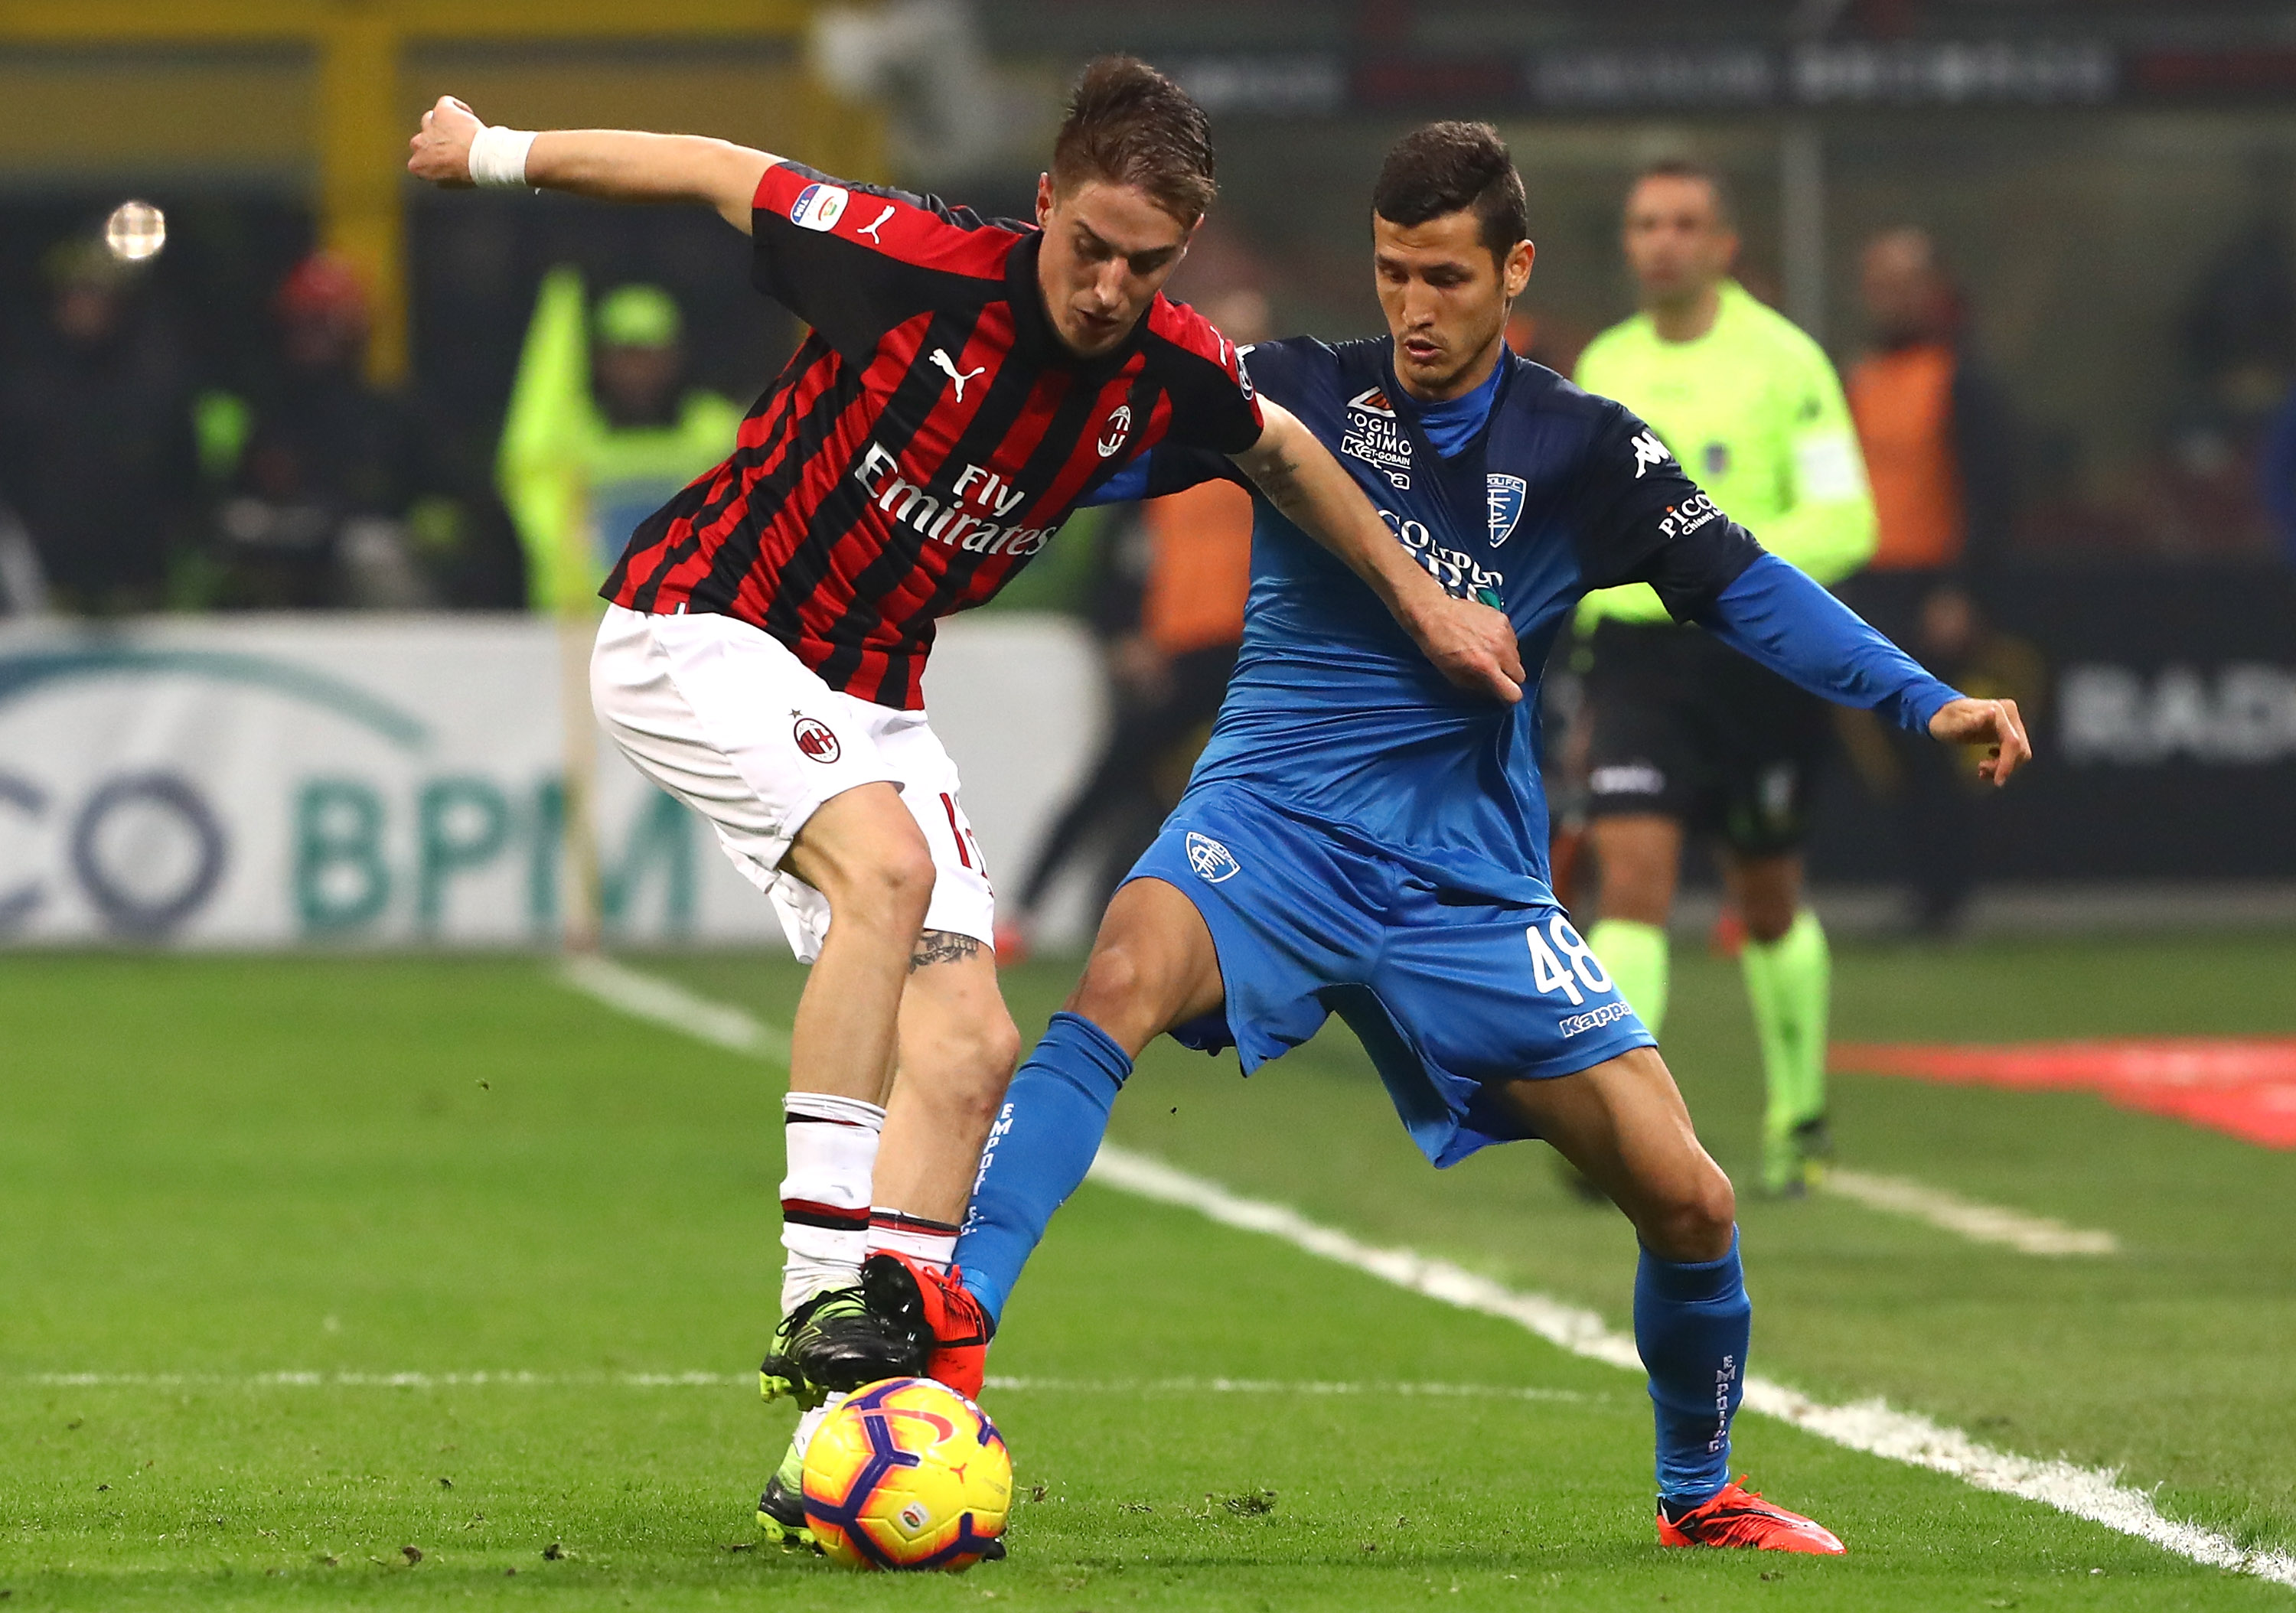 MILAN, ITALY - FEBRUARY 22: Salih Ucan (R) of Empoli competes for the ball with Andrea Conti (L) of AC Milan during the Serie A match between AC Milan and Empoli at Stadio Giuseppe Meazza on February 22, 2019 in Milan, Italy. (Photo by Marco Luzzani/Getty Images)